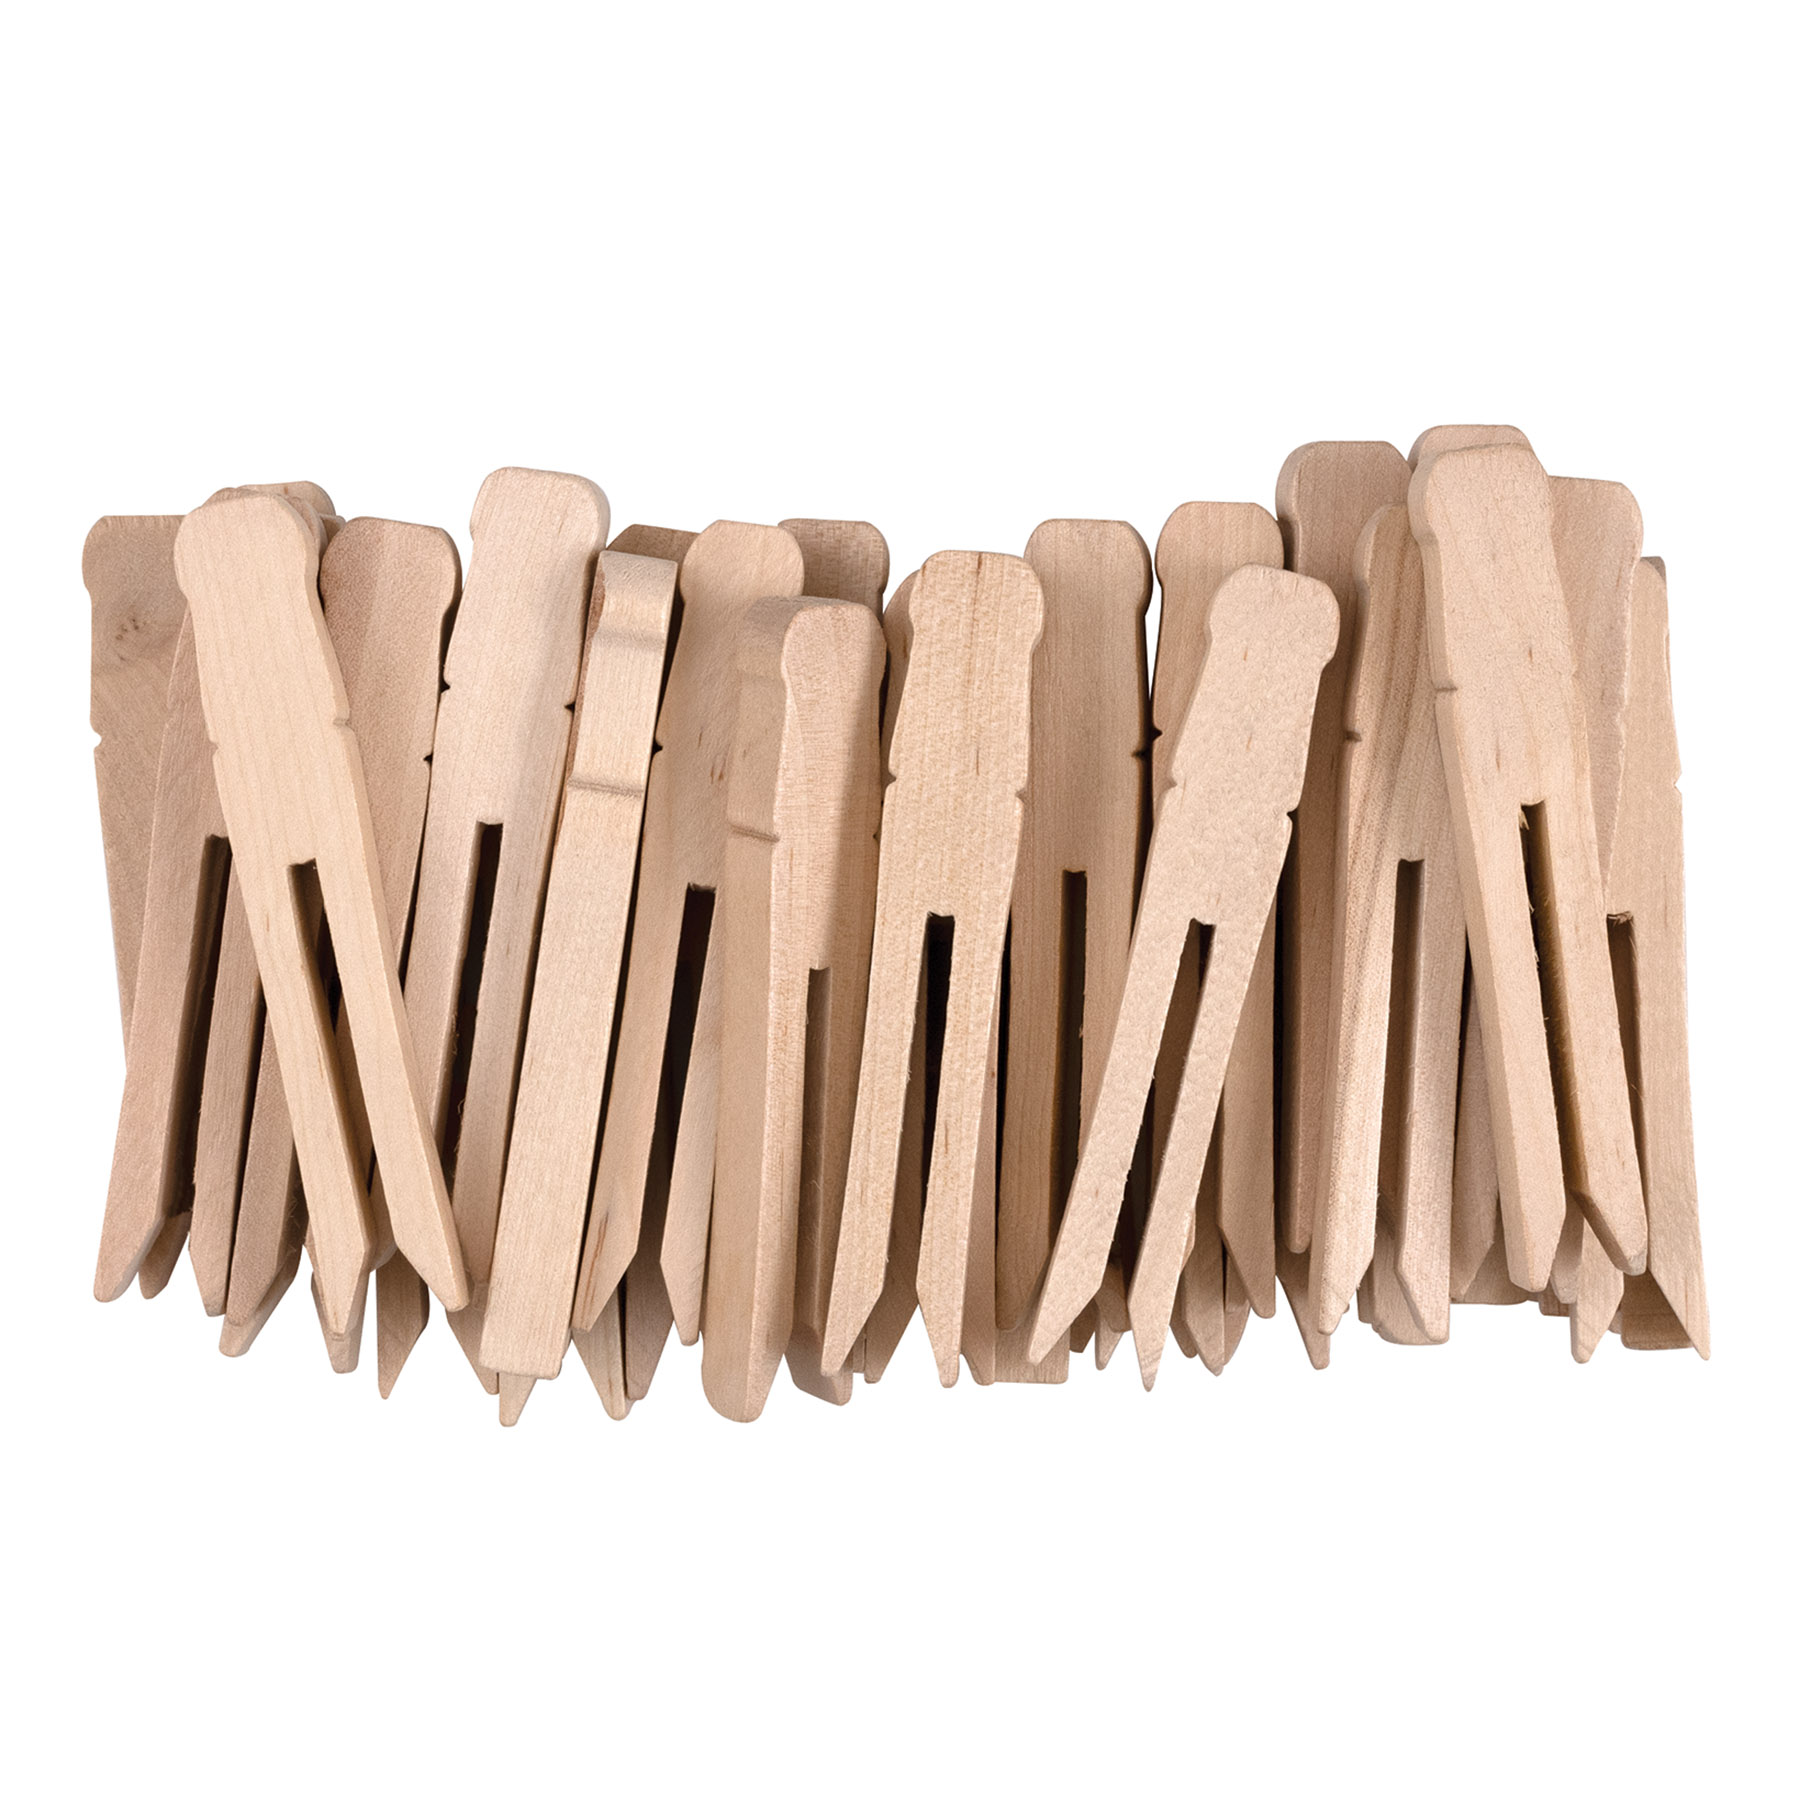 Flat Slotted Clothespins, Natural, 3.75, 40 Pieces - CK-368501